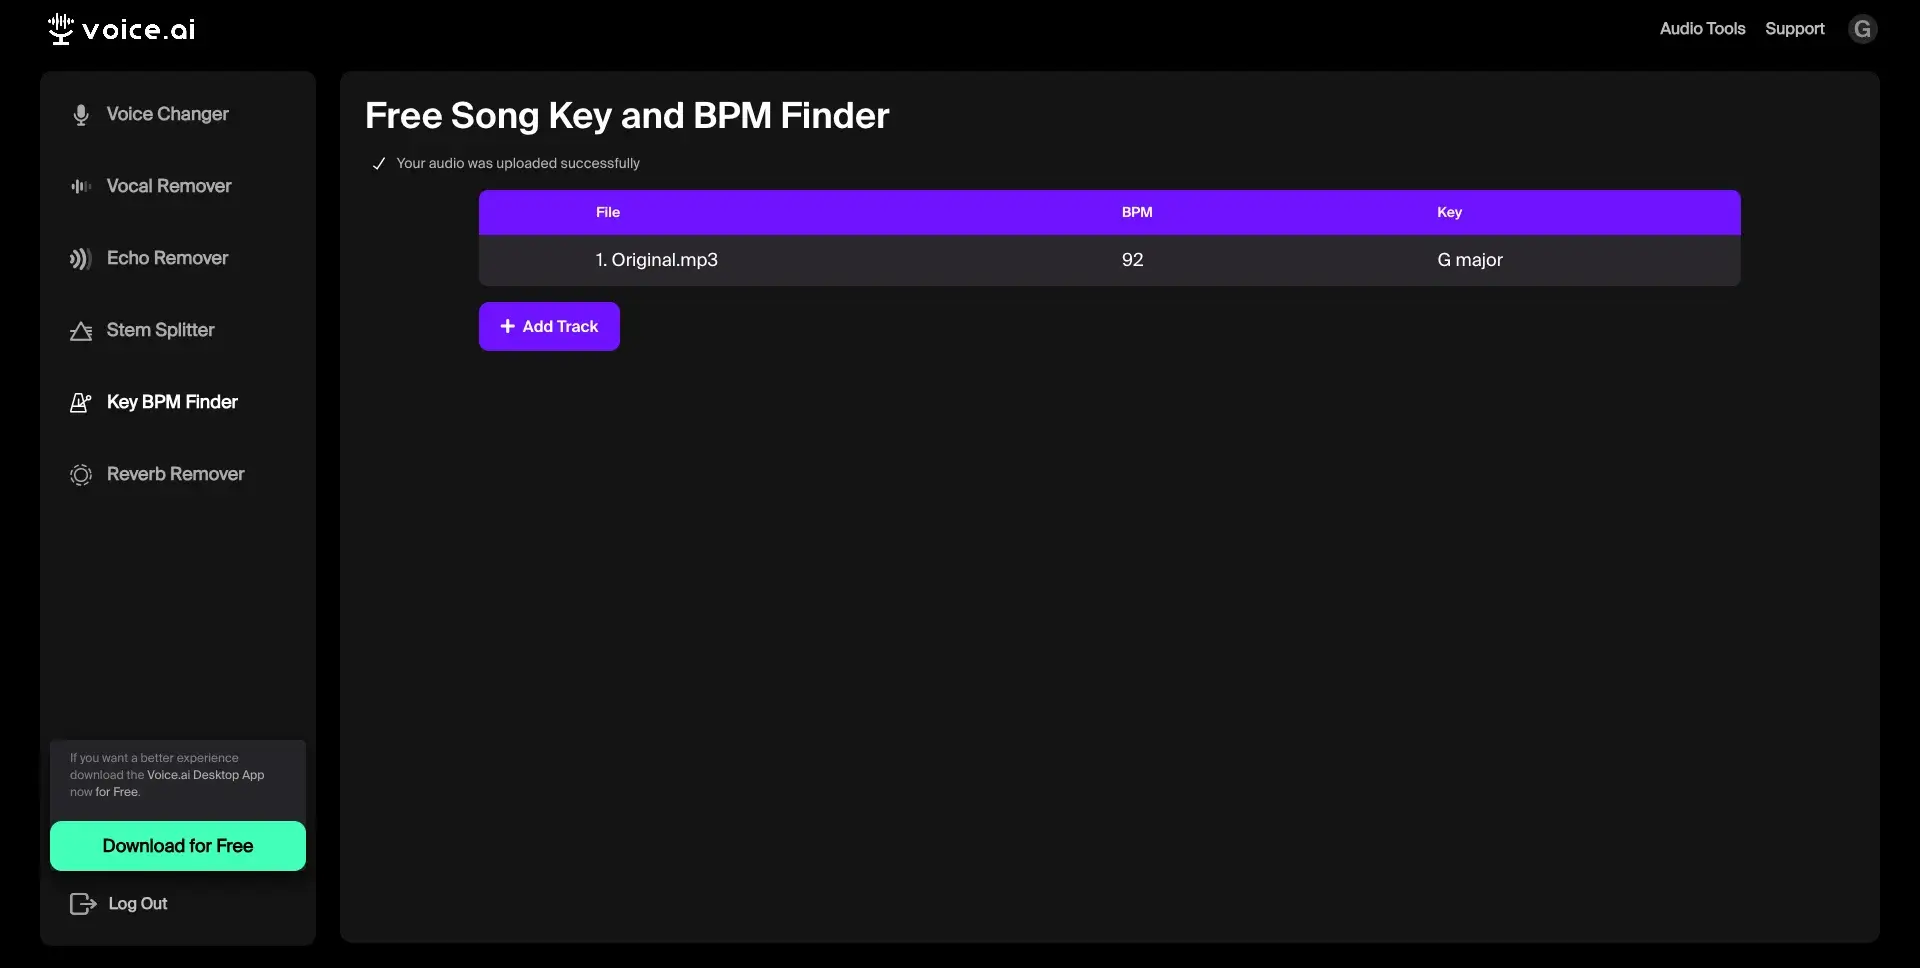 Key and BPM Finder Results